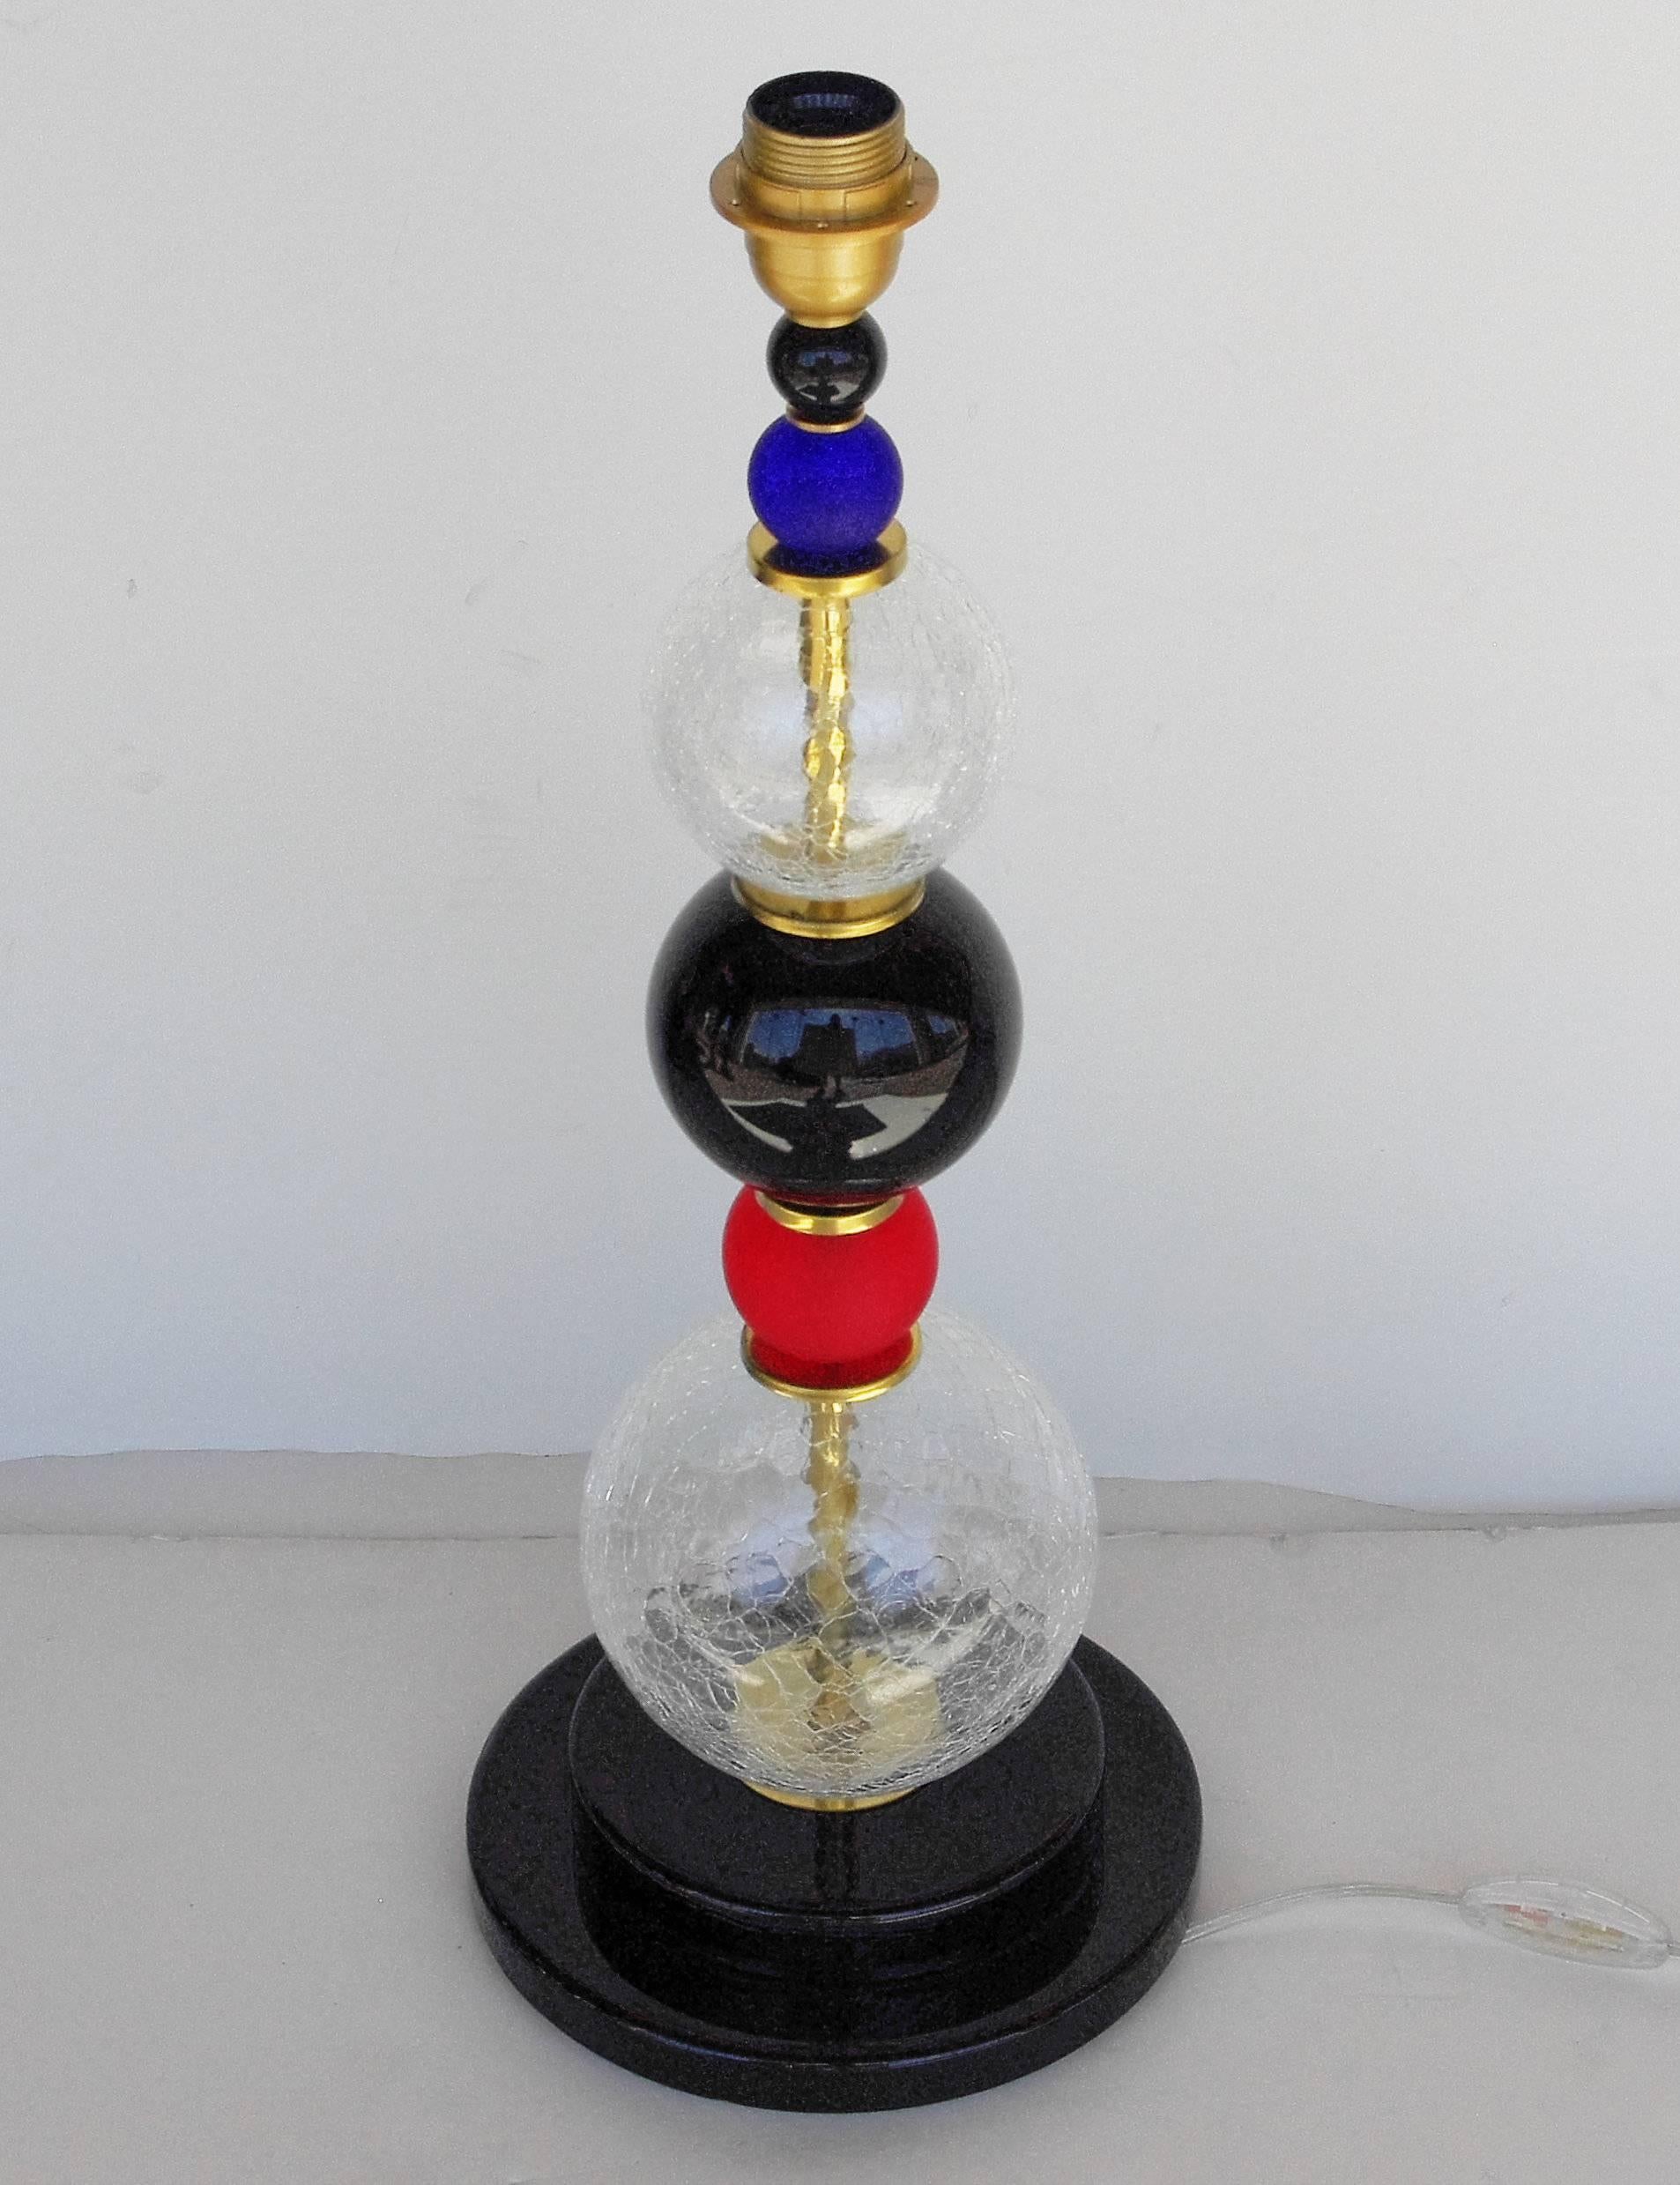 Italian Vintage table lamps with blue, clear, black and red Murano glass sphere details and brass frame, in the style of Ettore Sottsass. / Made in Italy in the 1980's
1 light / max 40W each
Diameter: 8 inches / Height: 23 inches
1 pair in stock in